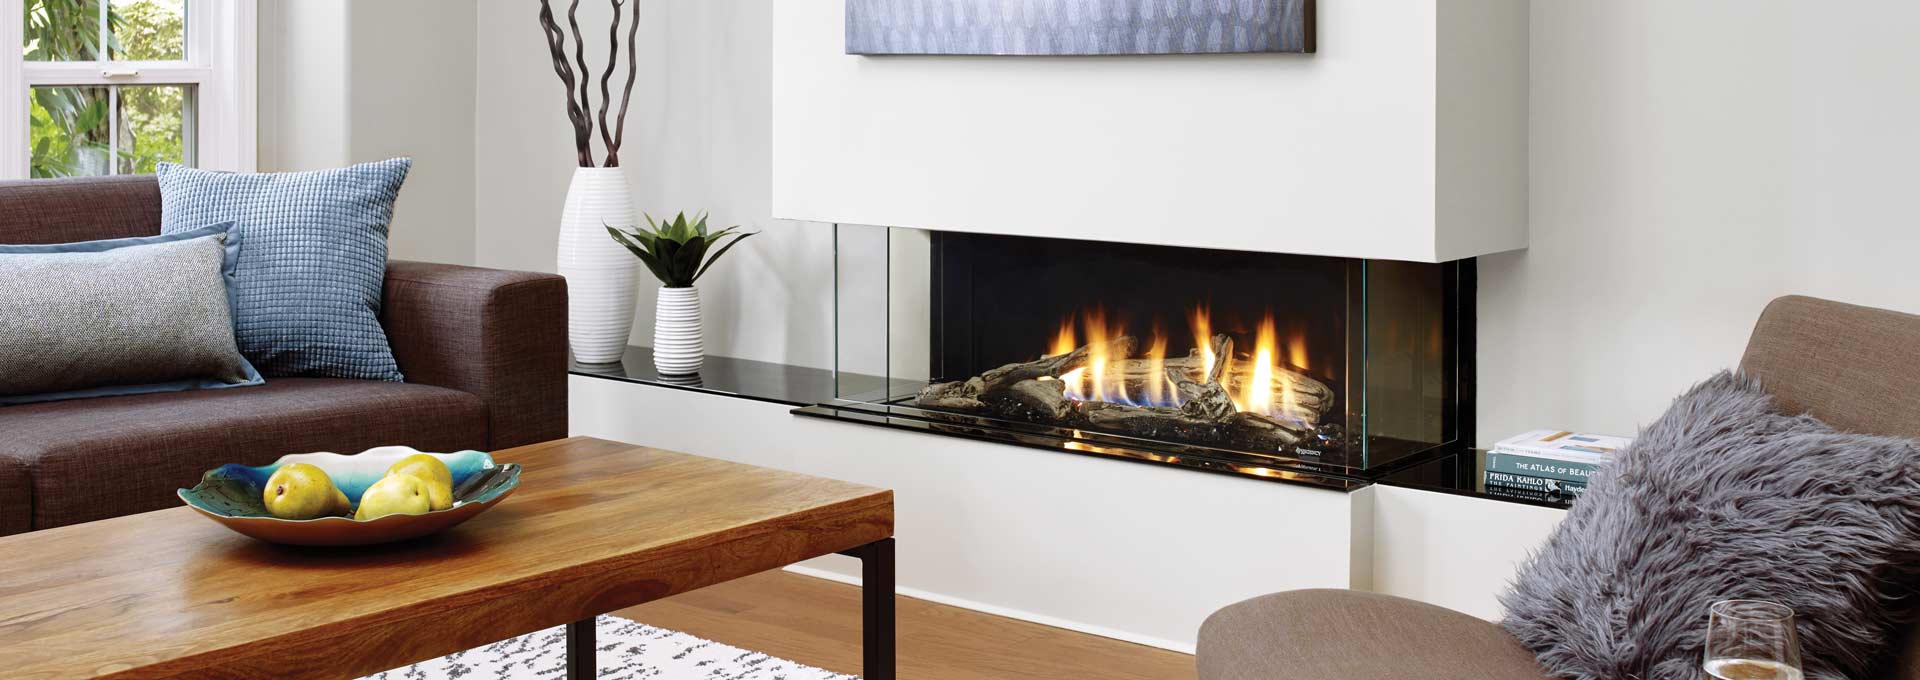 Spring Fireplace Renovation Guide 